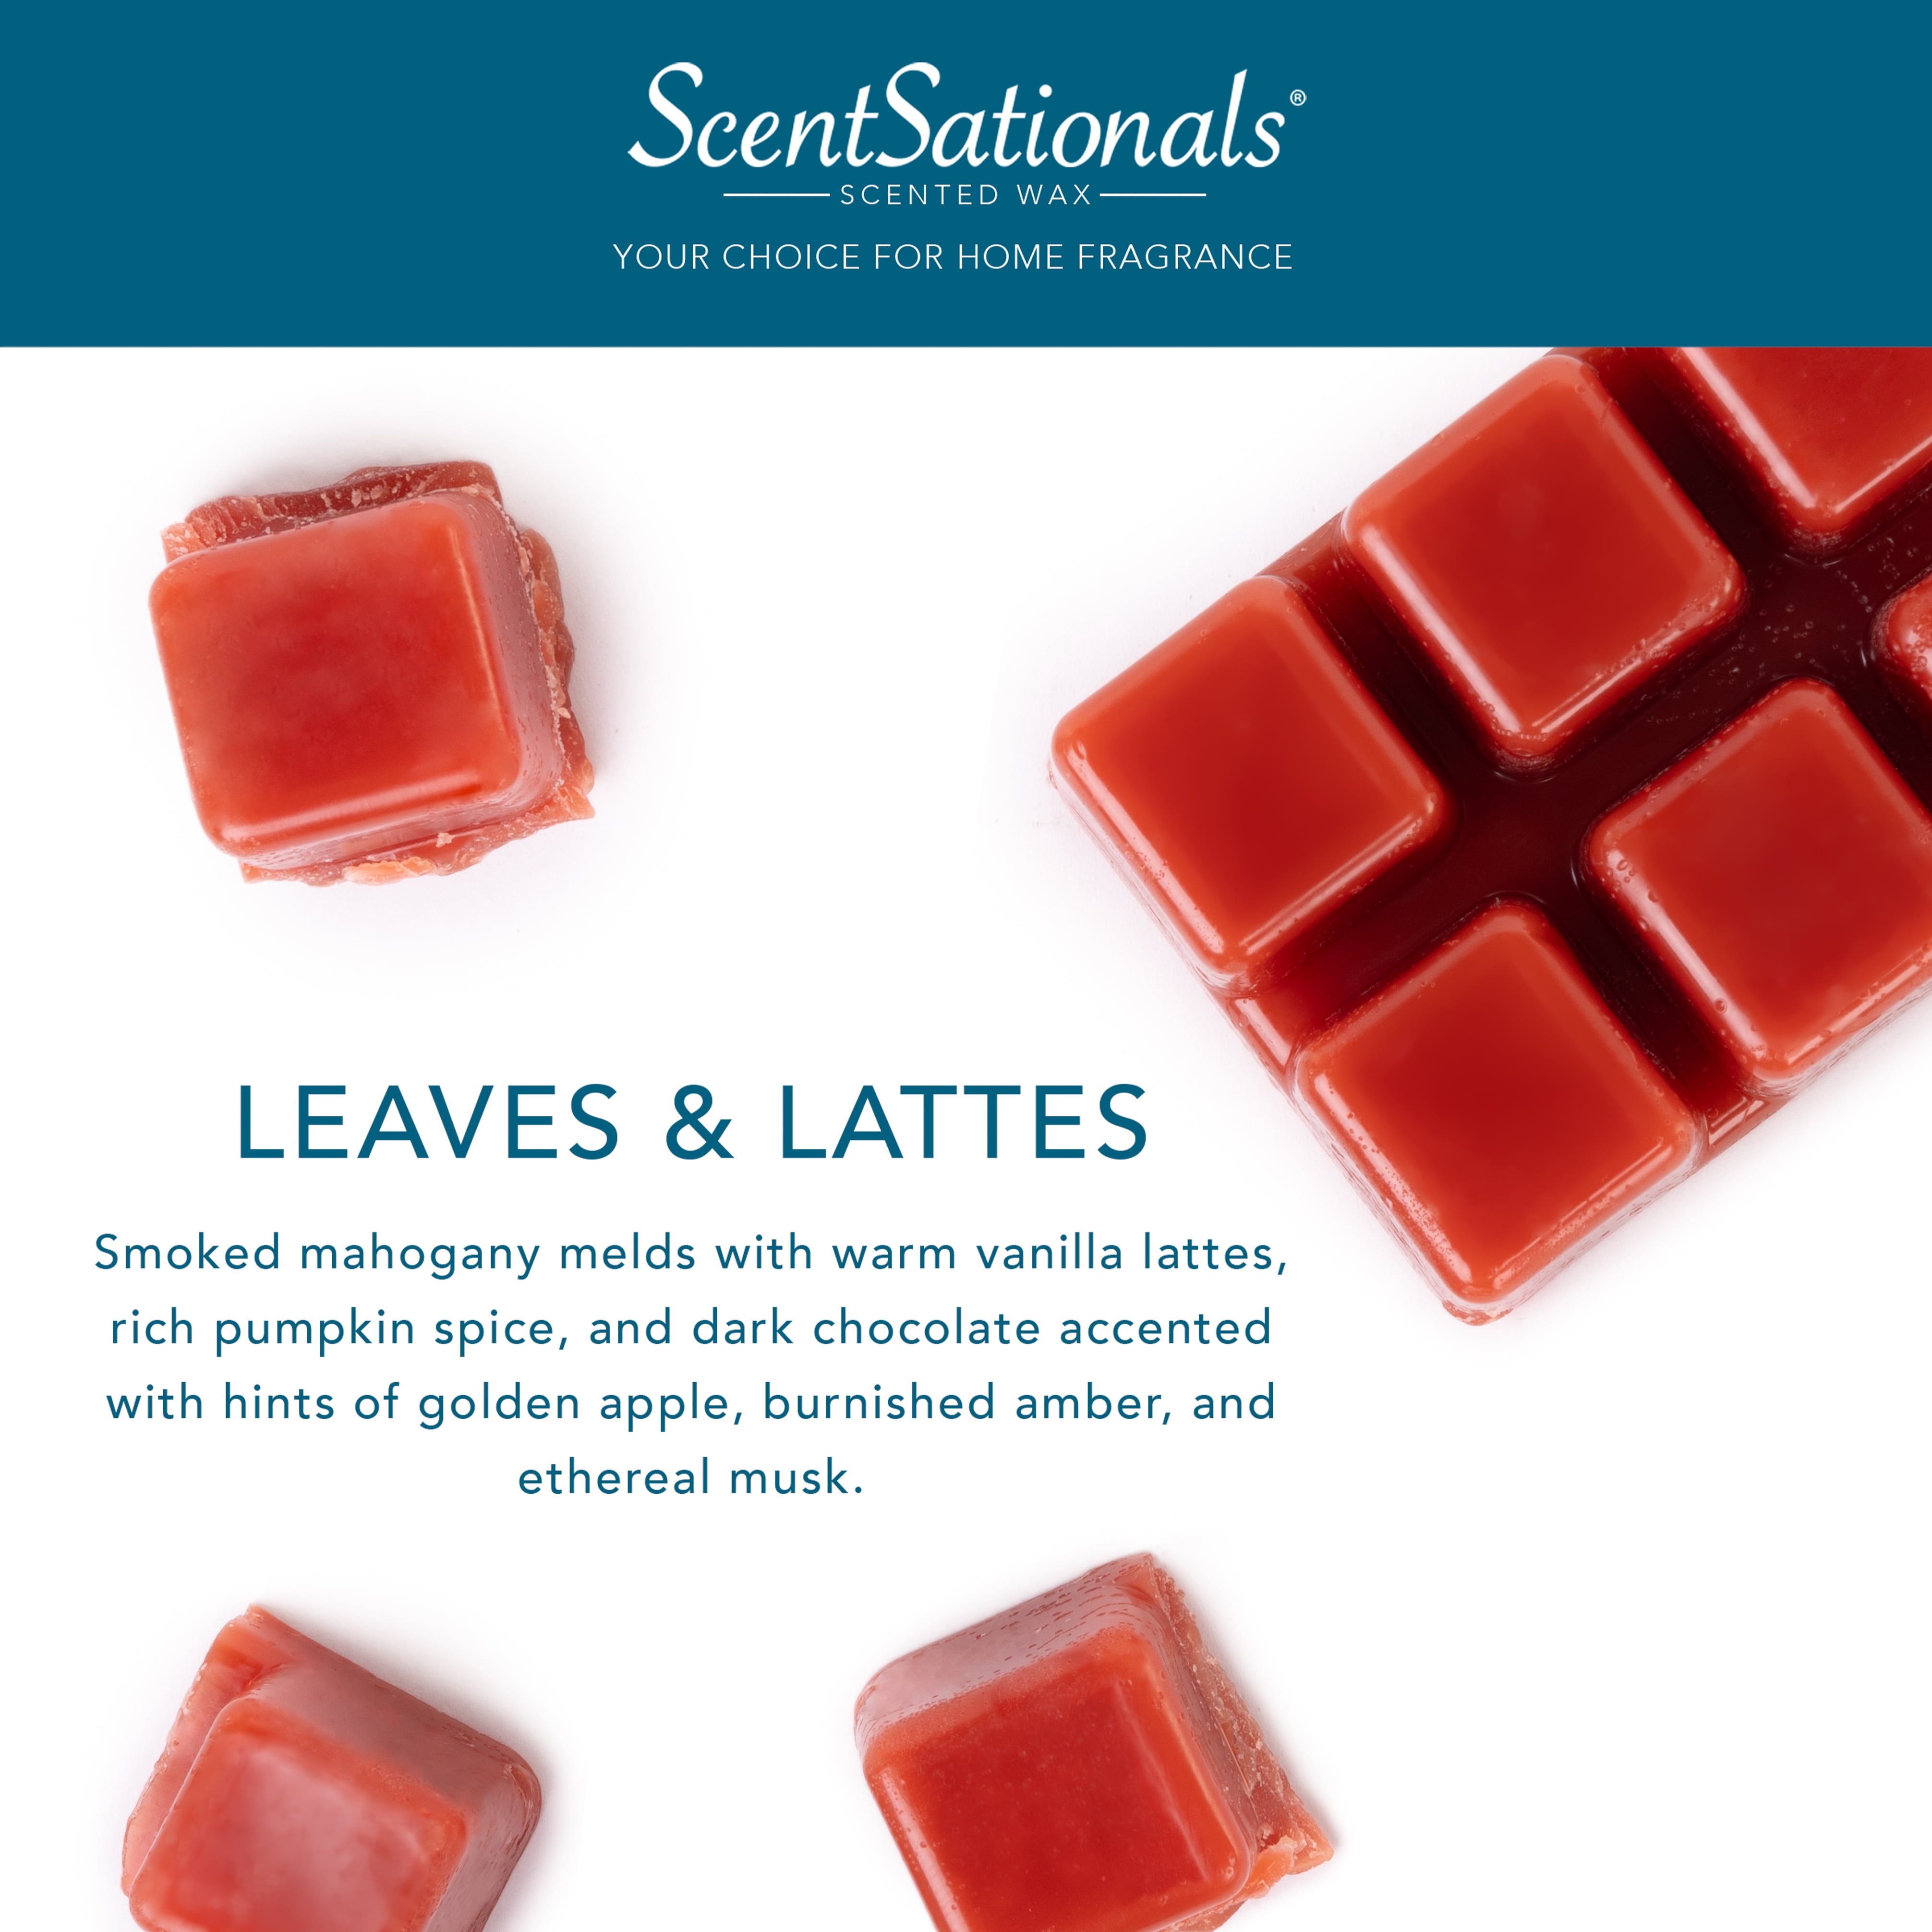 Clove Scented Wax Melts 2 Pack With FREE SHIPPING Scented Soy Wax Cubes  Compare to Scentsy® Wax Bars 